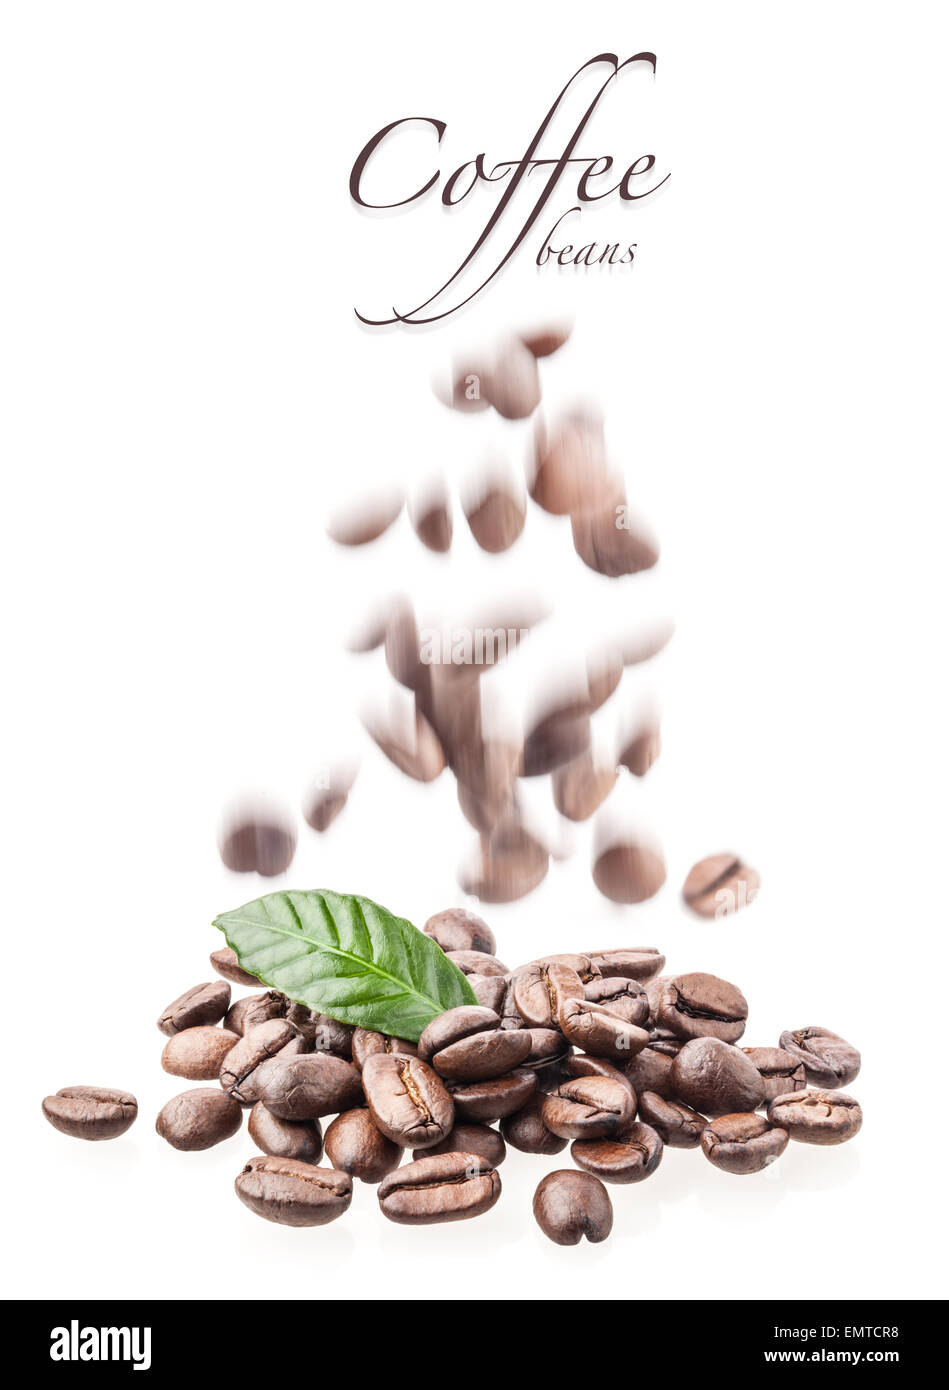 Flying coffee beans isolated on white background Stock Photo